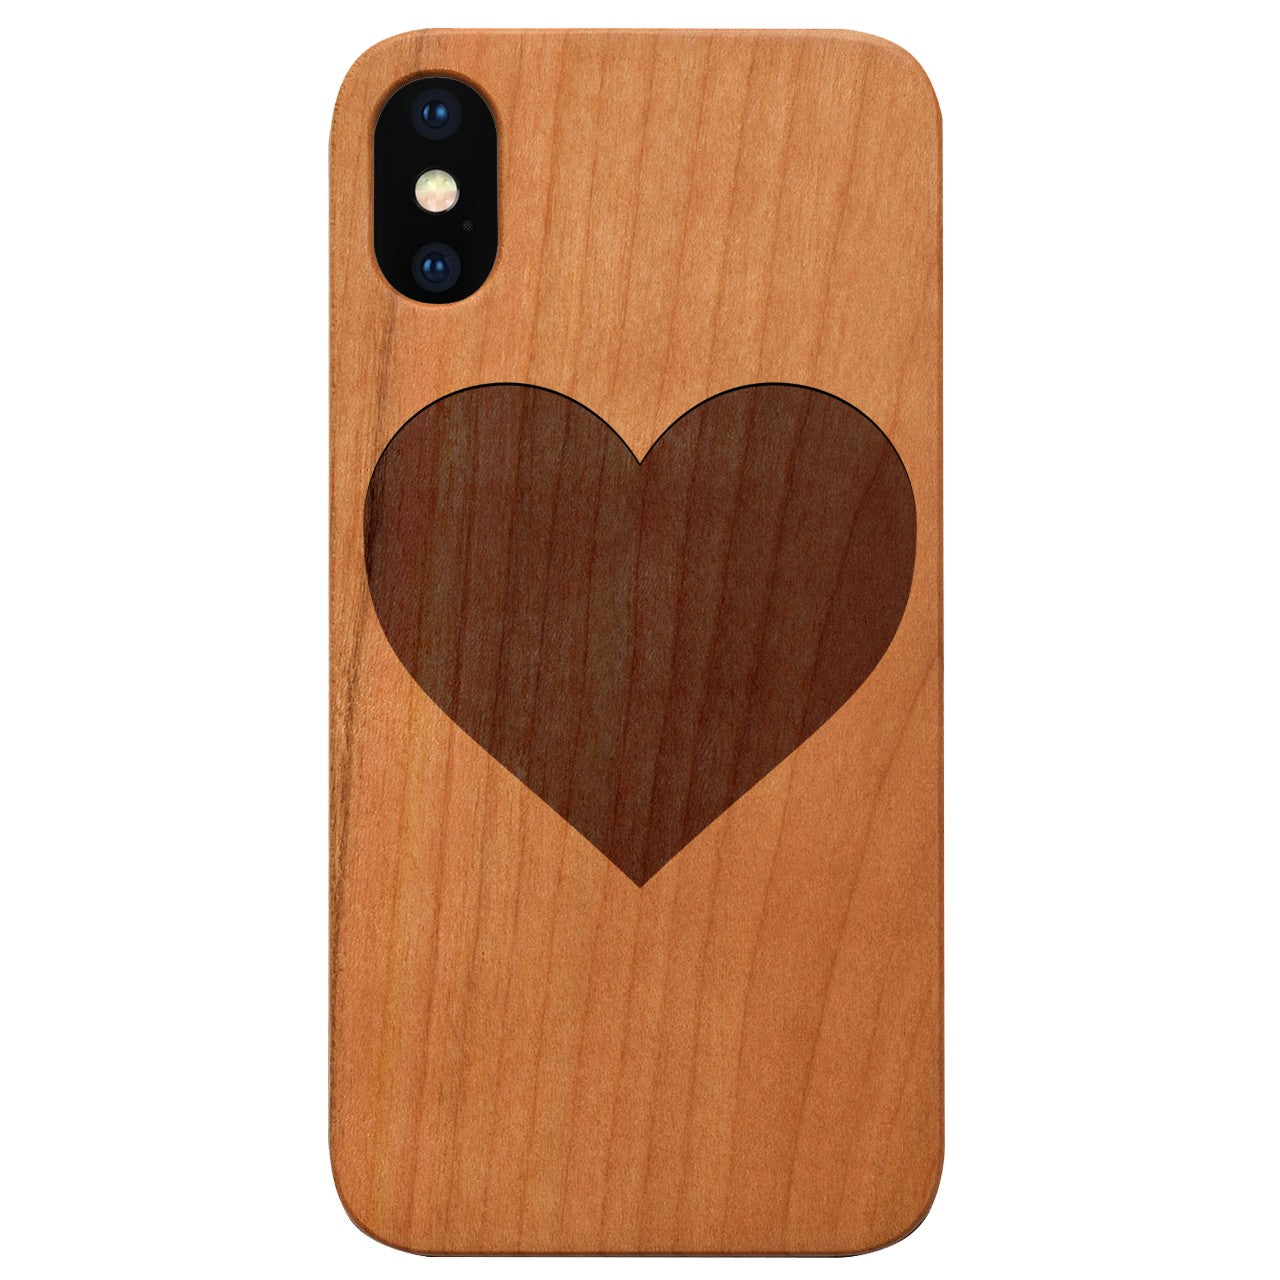  Heart - Engraved - Wooden Phone Case - IPhone 13 Models